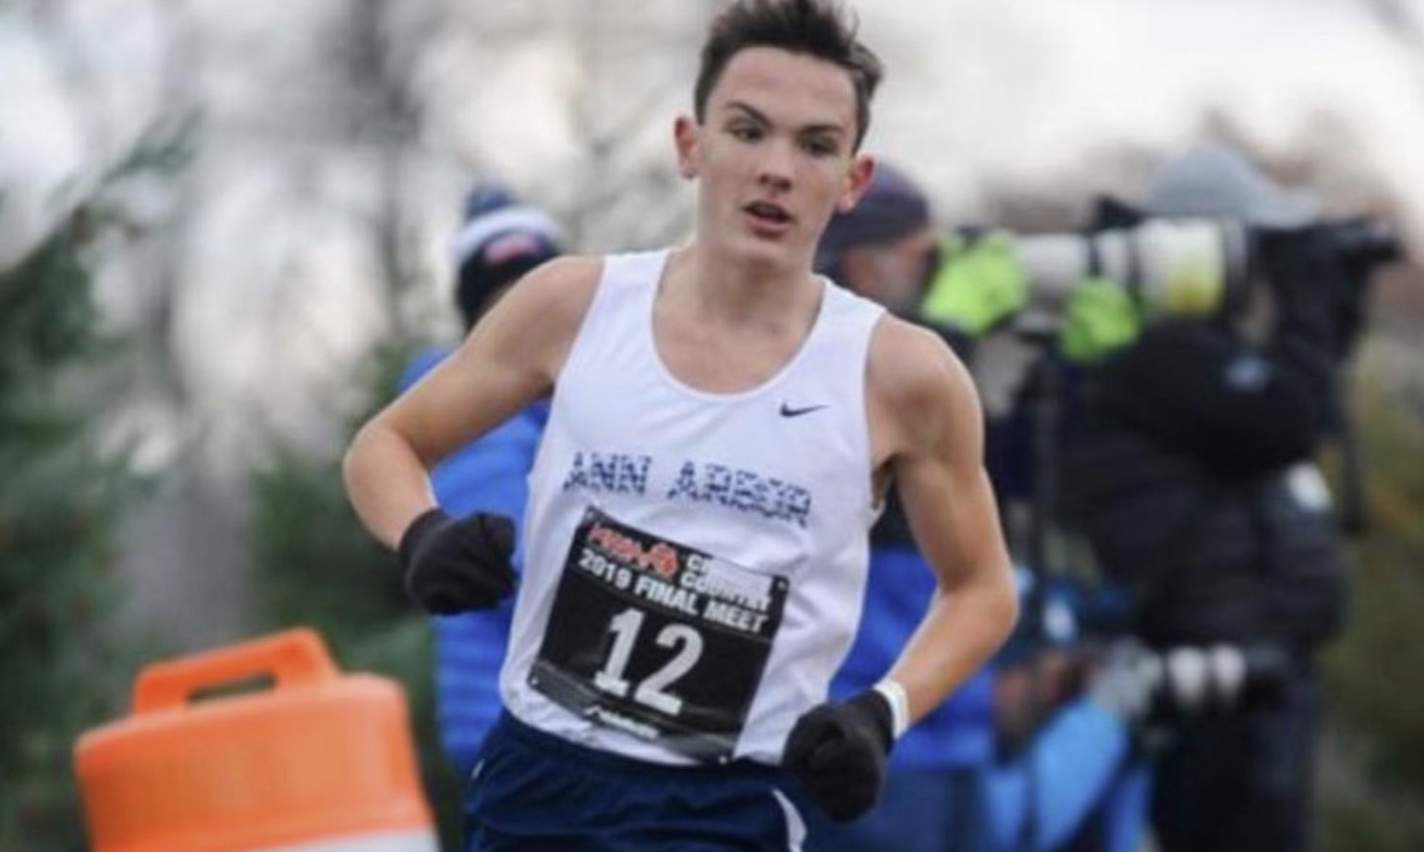 Ann Arbor teen sets a US indoor mile record at weekend race